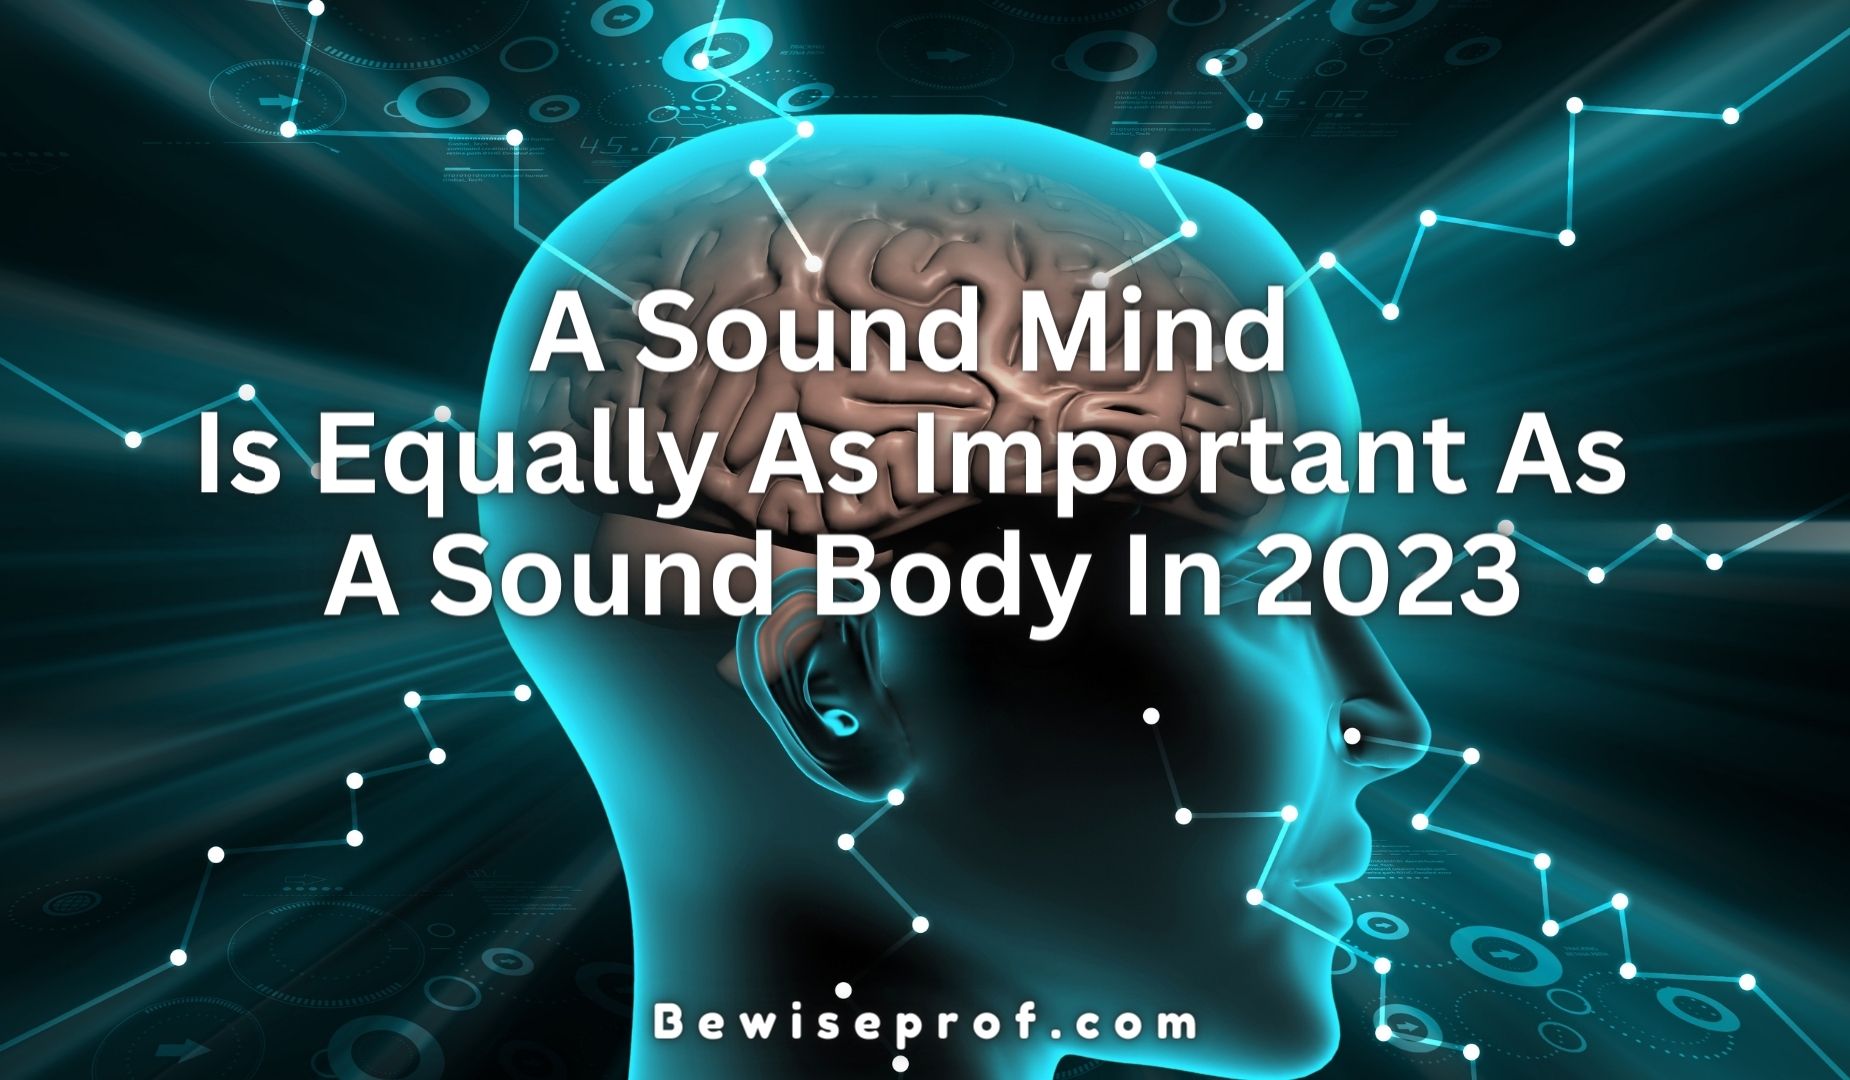 A Sound Mind Is Equally As Important As A Sound Body In 2023